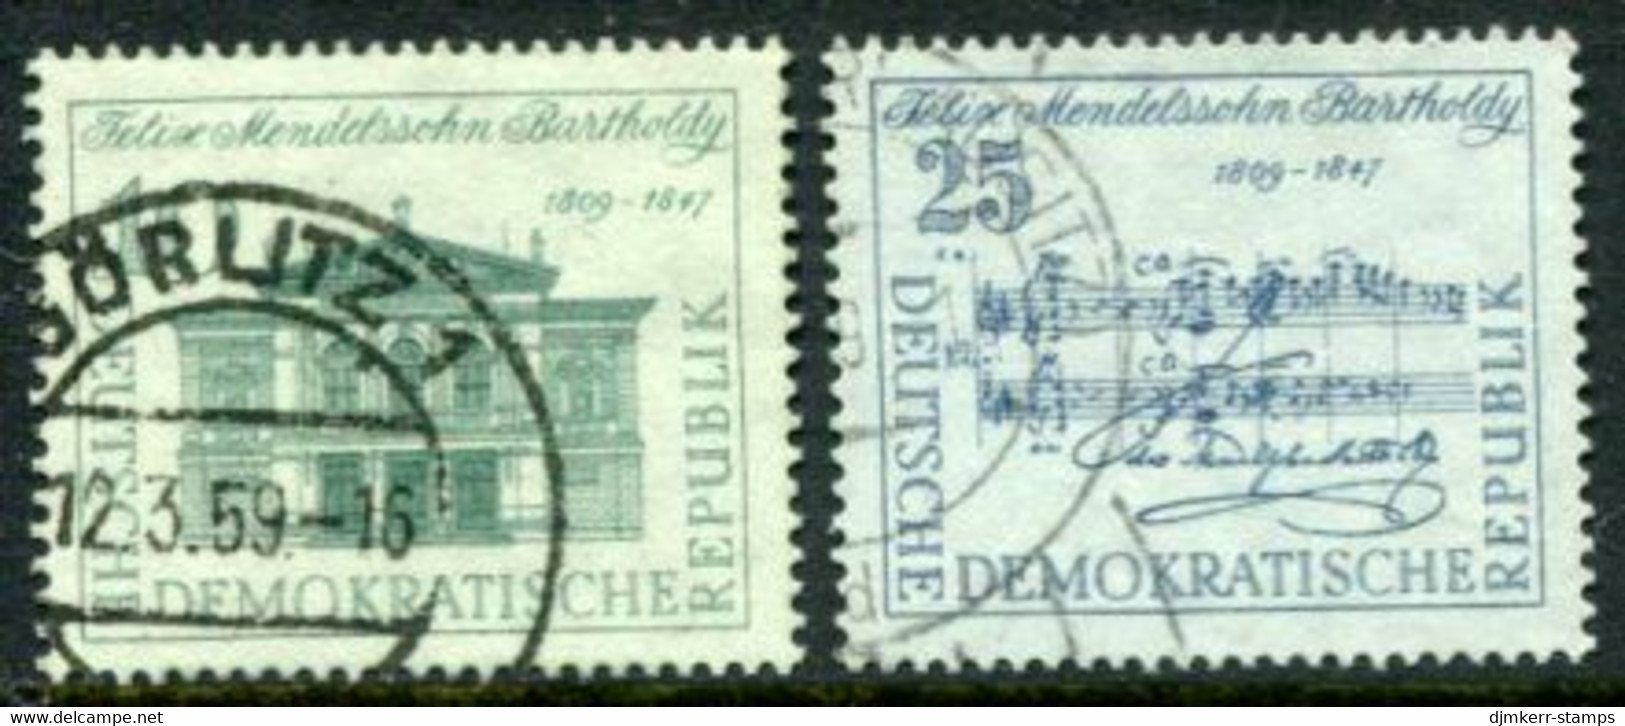 DDR / E. GERMANY 1959 Mendelssohn Anniversary Used  Michel  676-77 - Used Stamps